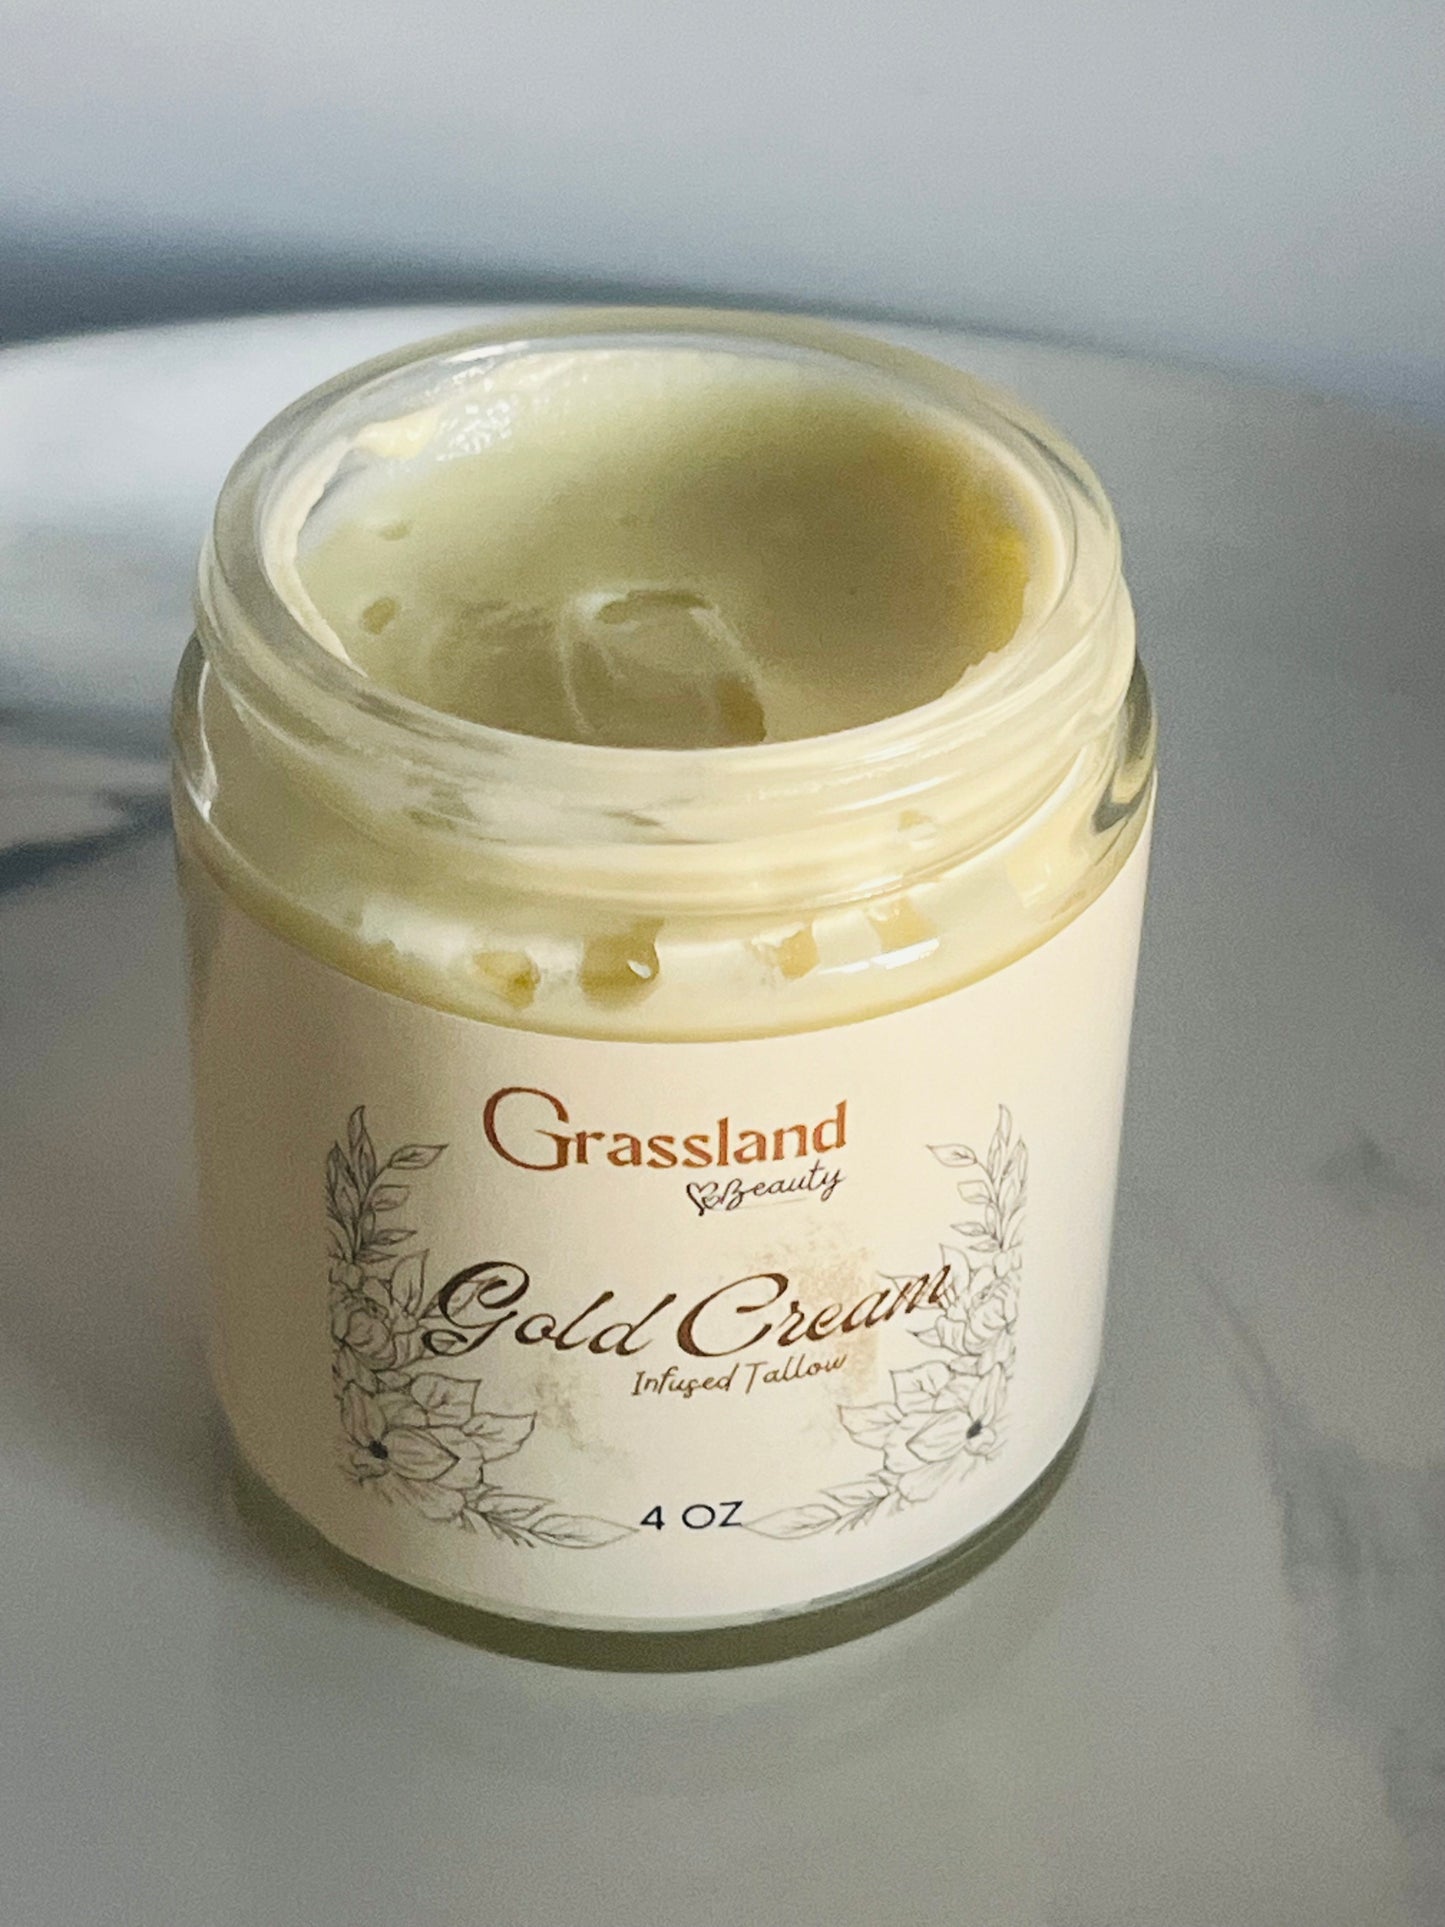 Gold Cream Infused Tallow Bestseller